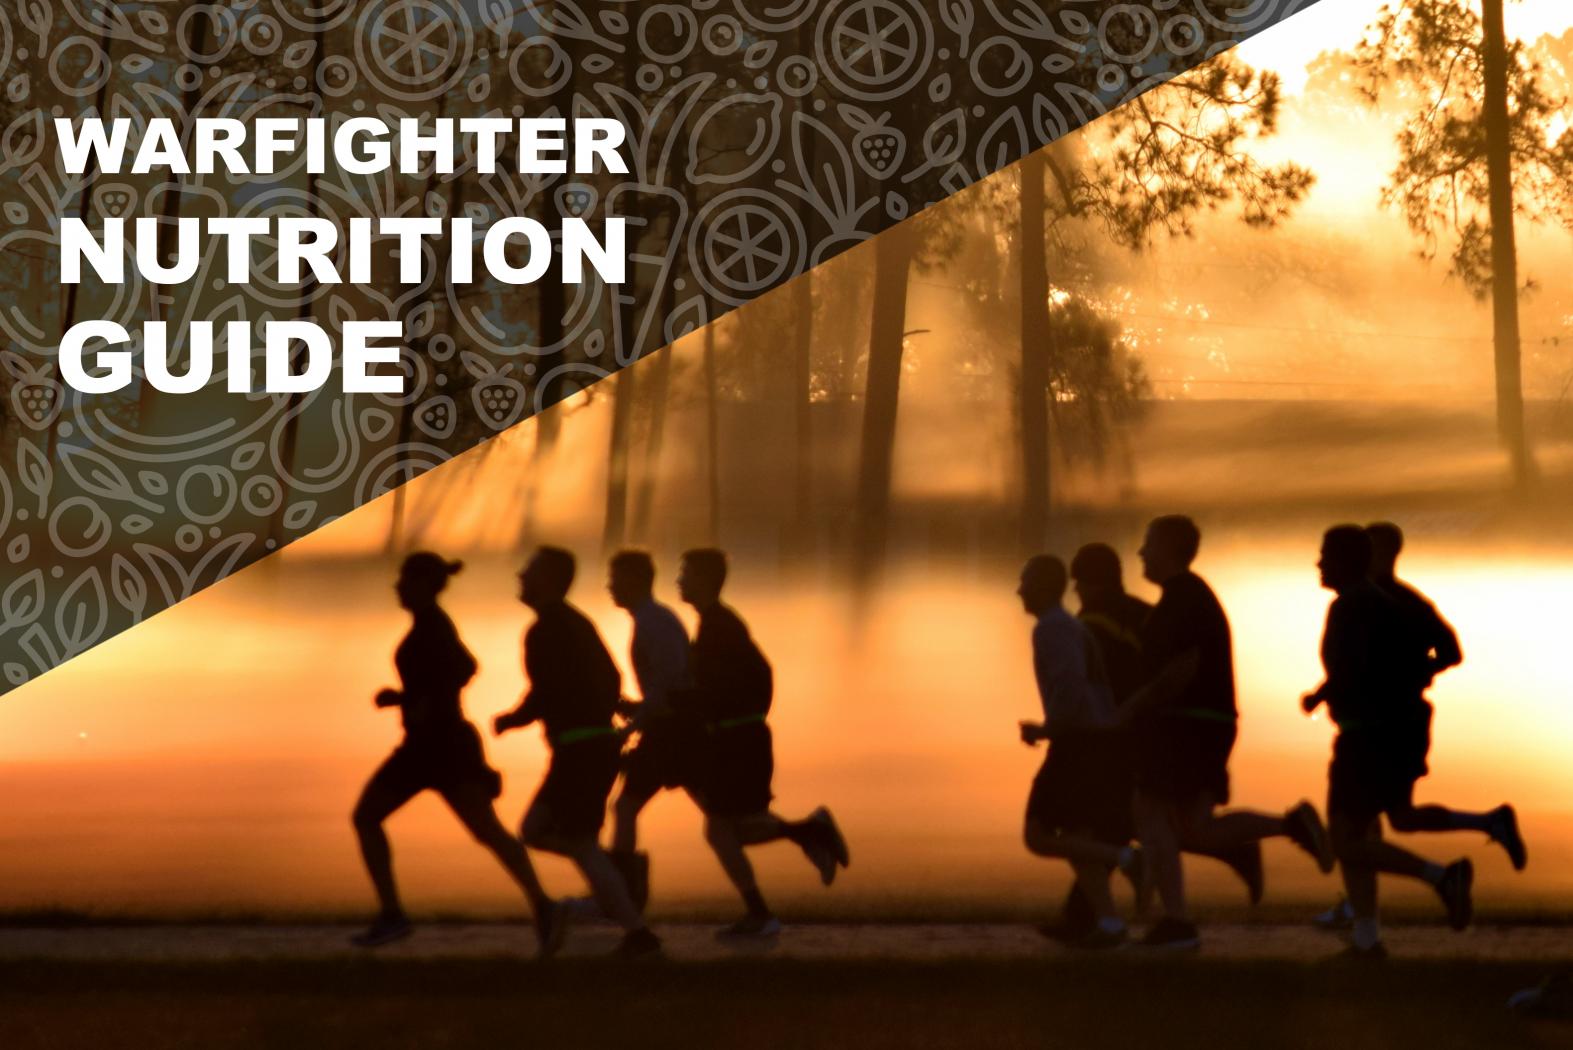 Warfighter Nutrition Guide. Chapter 13. Silhouette of people running for fitness training at sunrise.